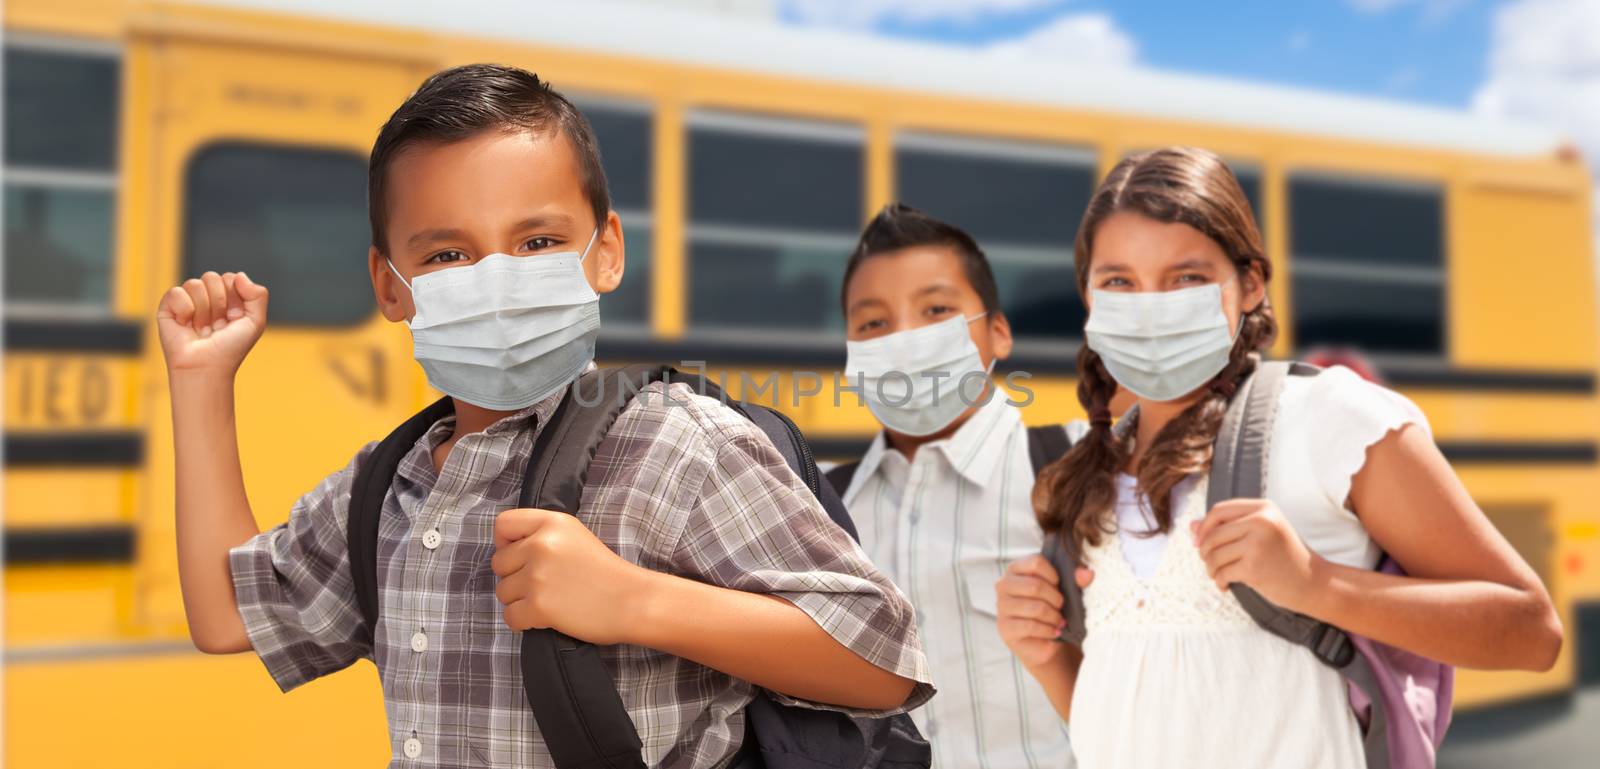 Hispanic Students Near School Bus Wearing Face Masks by Feverpitched